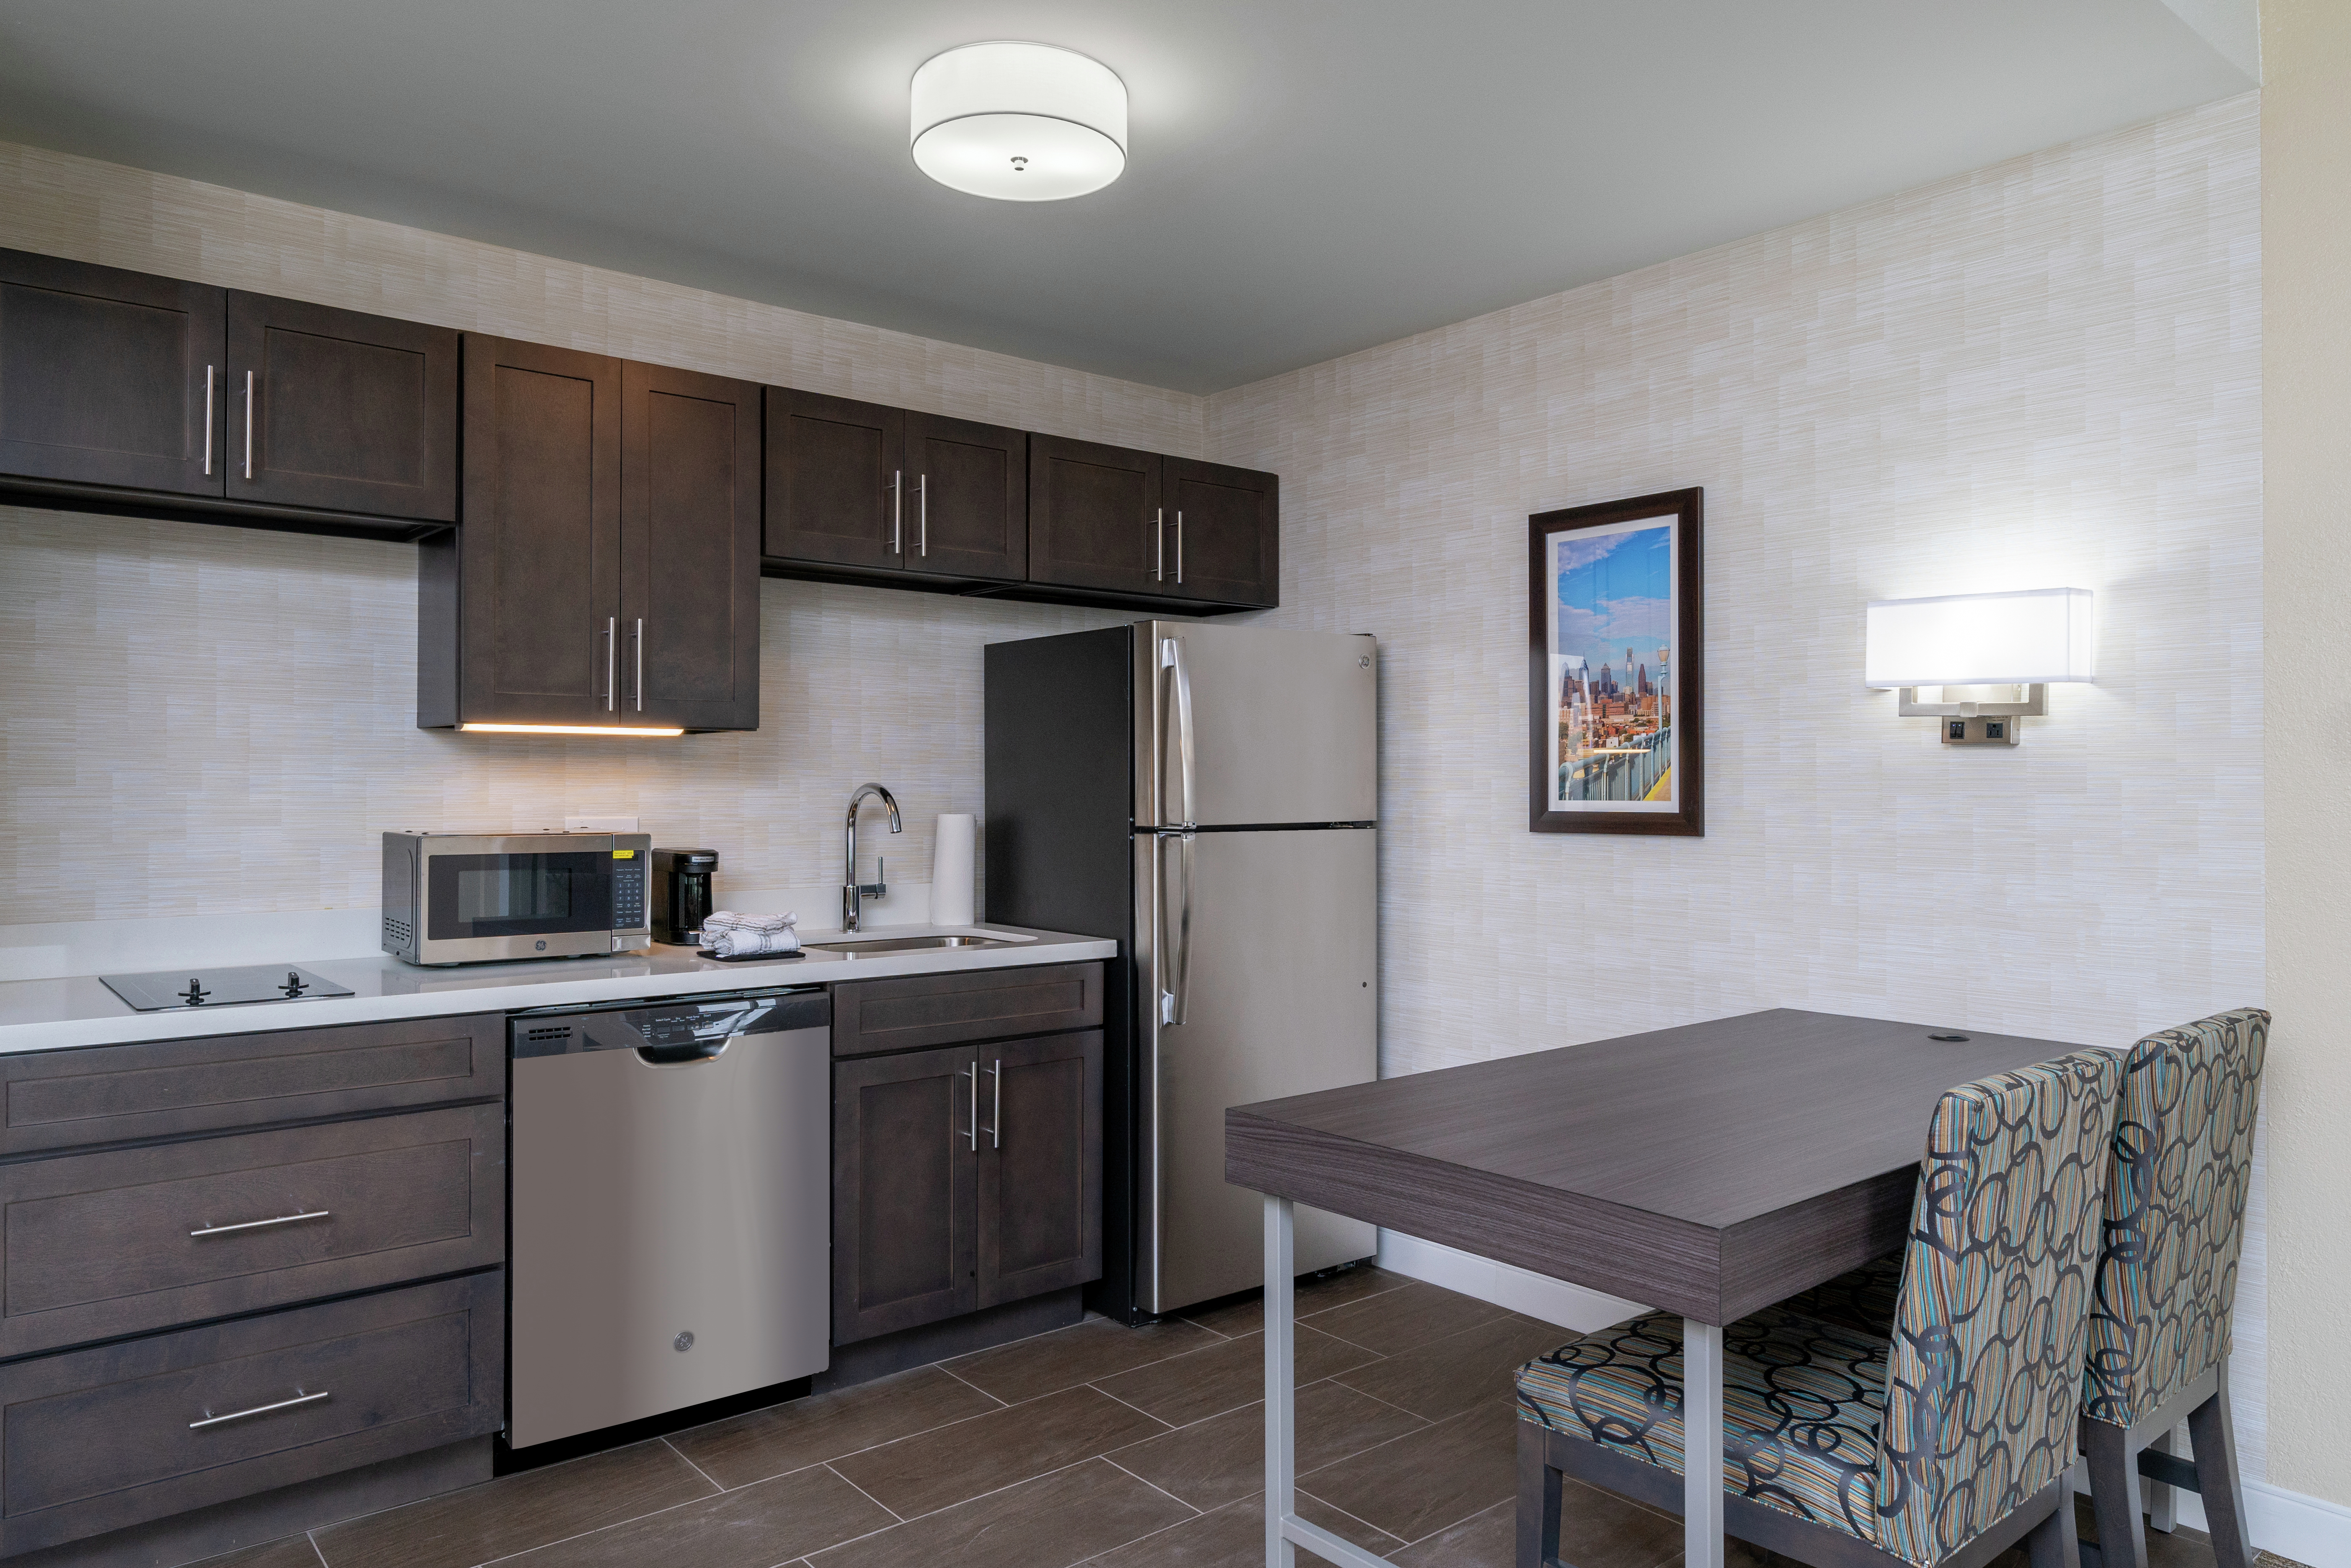 Guest Suite Kitchen Area with Dining Table, Chairs, Refridgerator, Microwave and Dishwasher